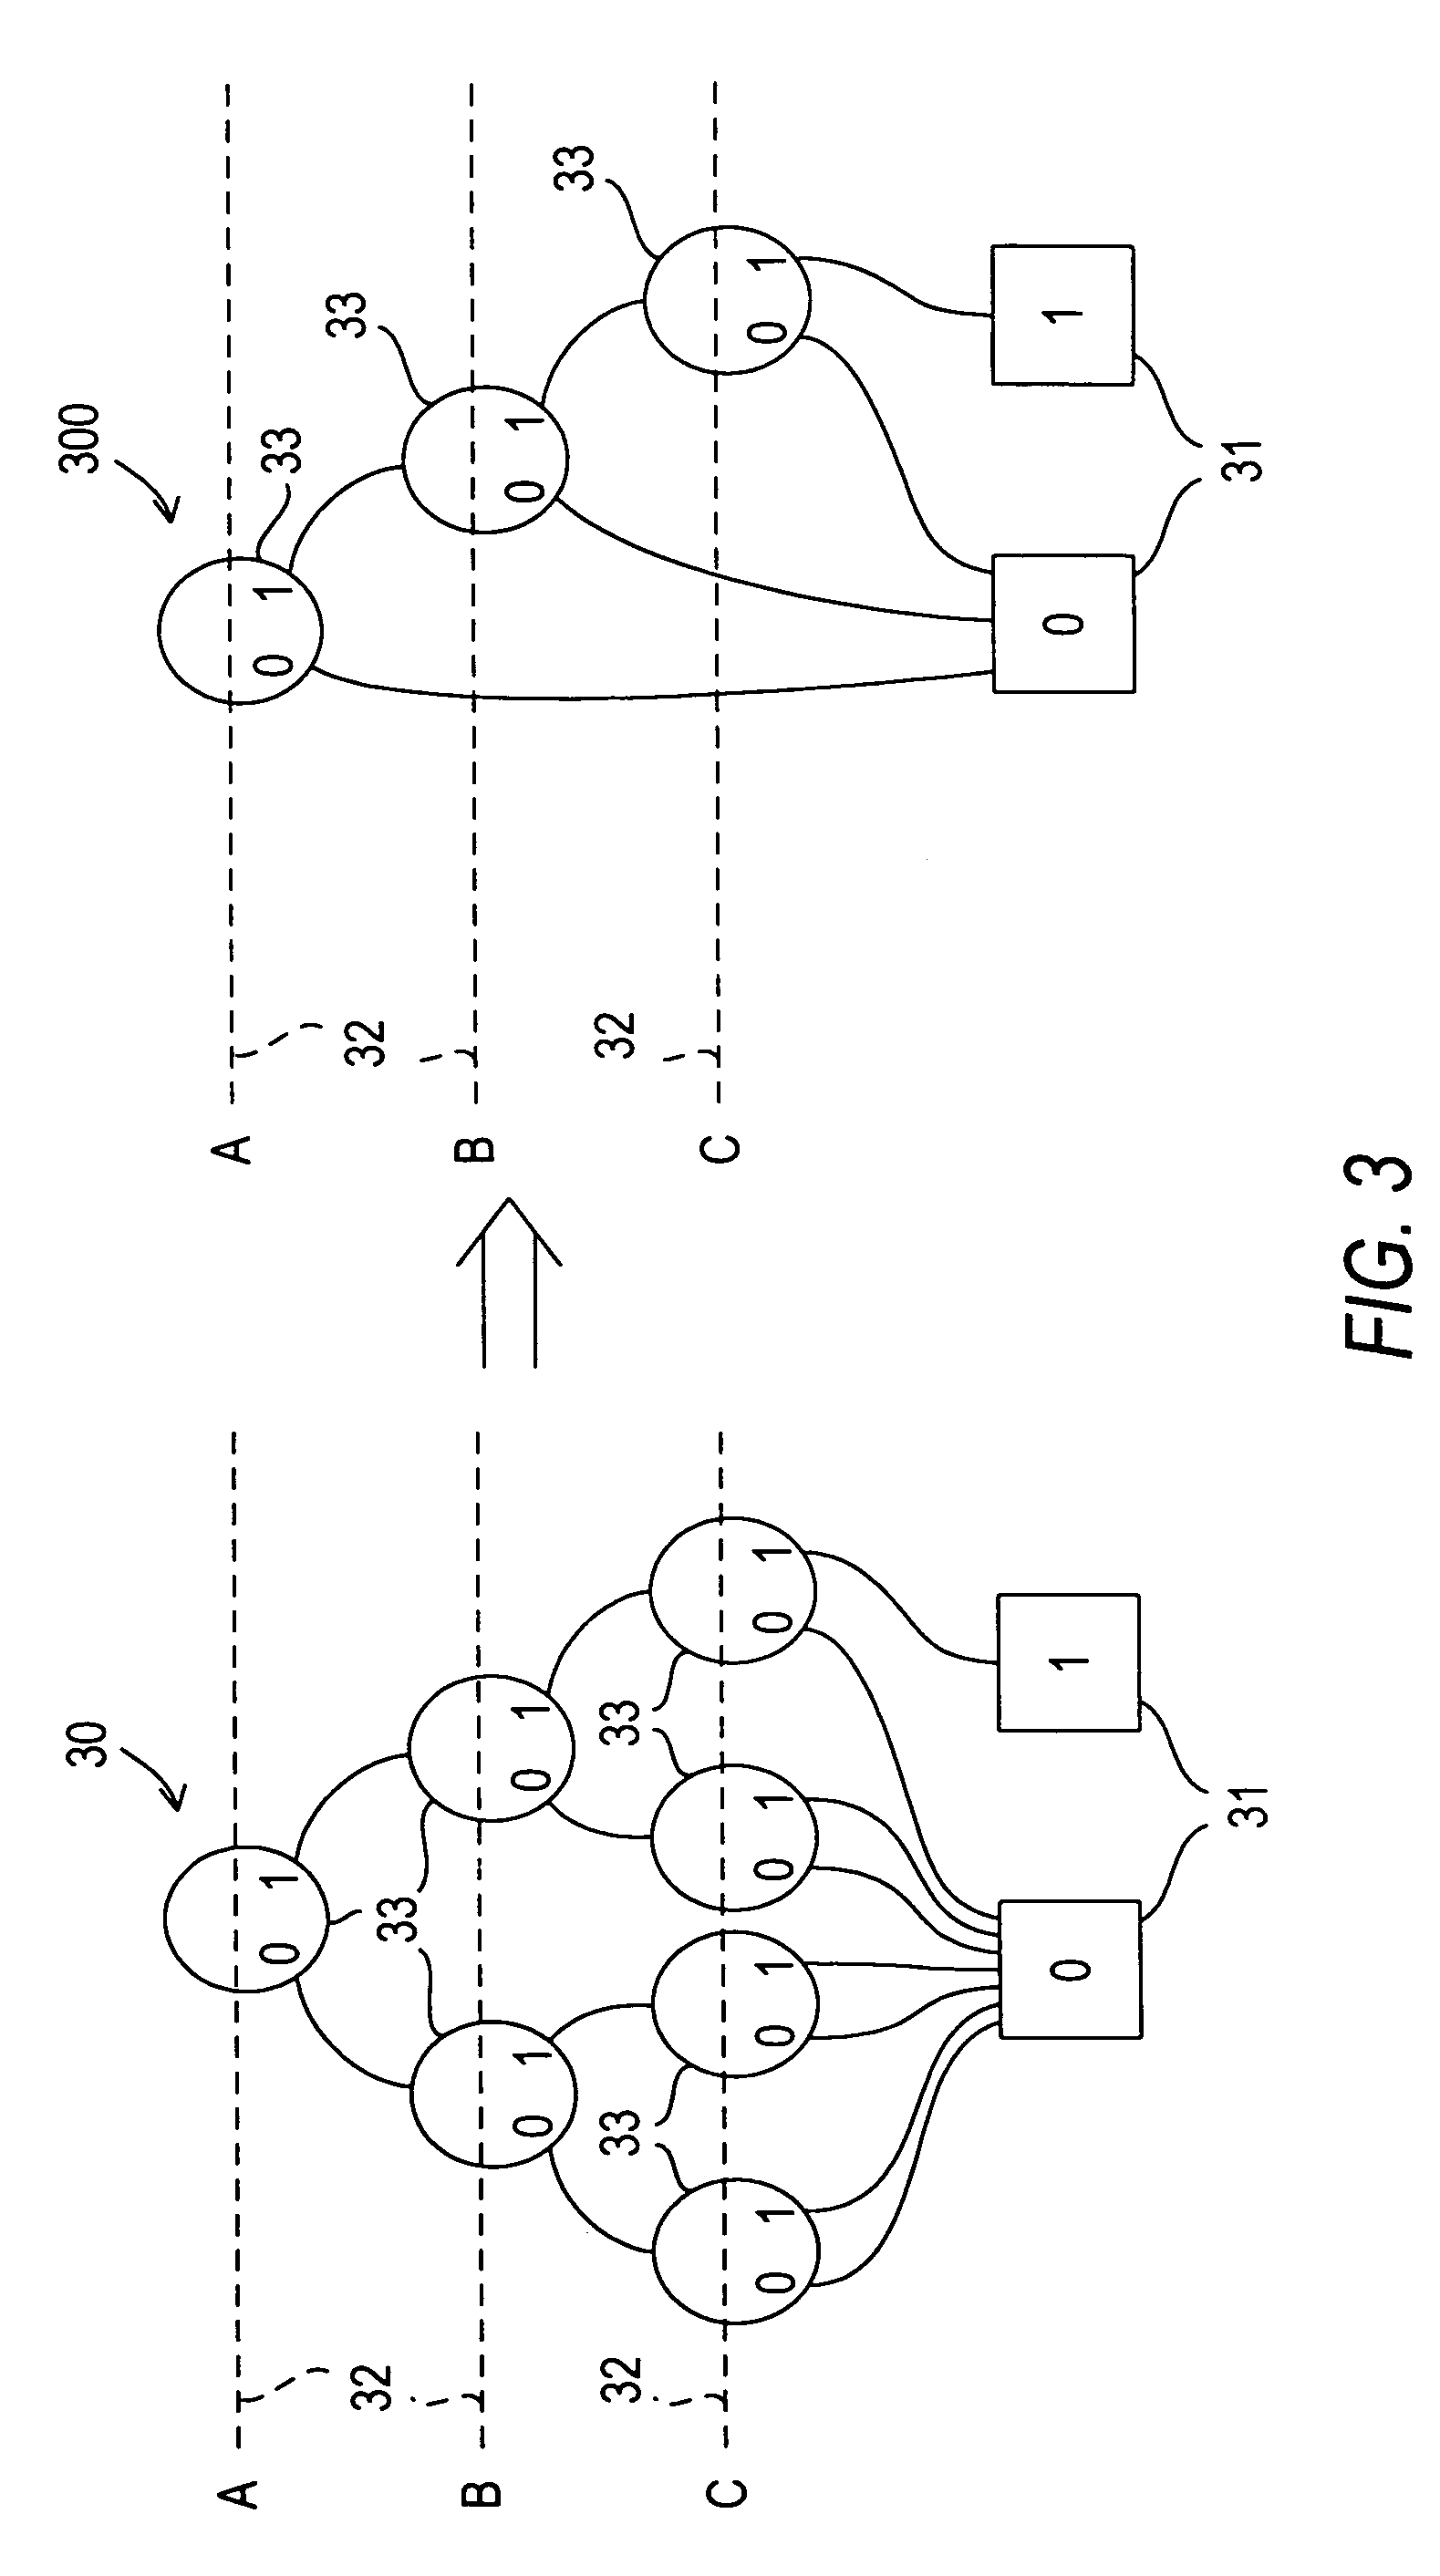 Technology mapping for programming and design of a programmable logic device by equating logic expressions